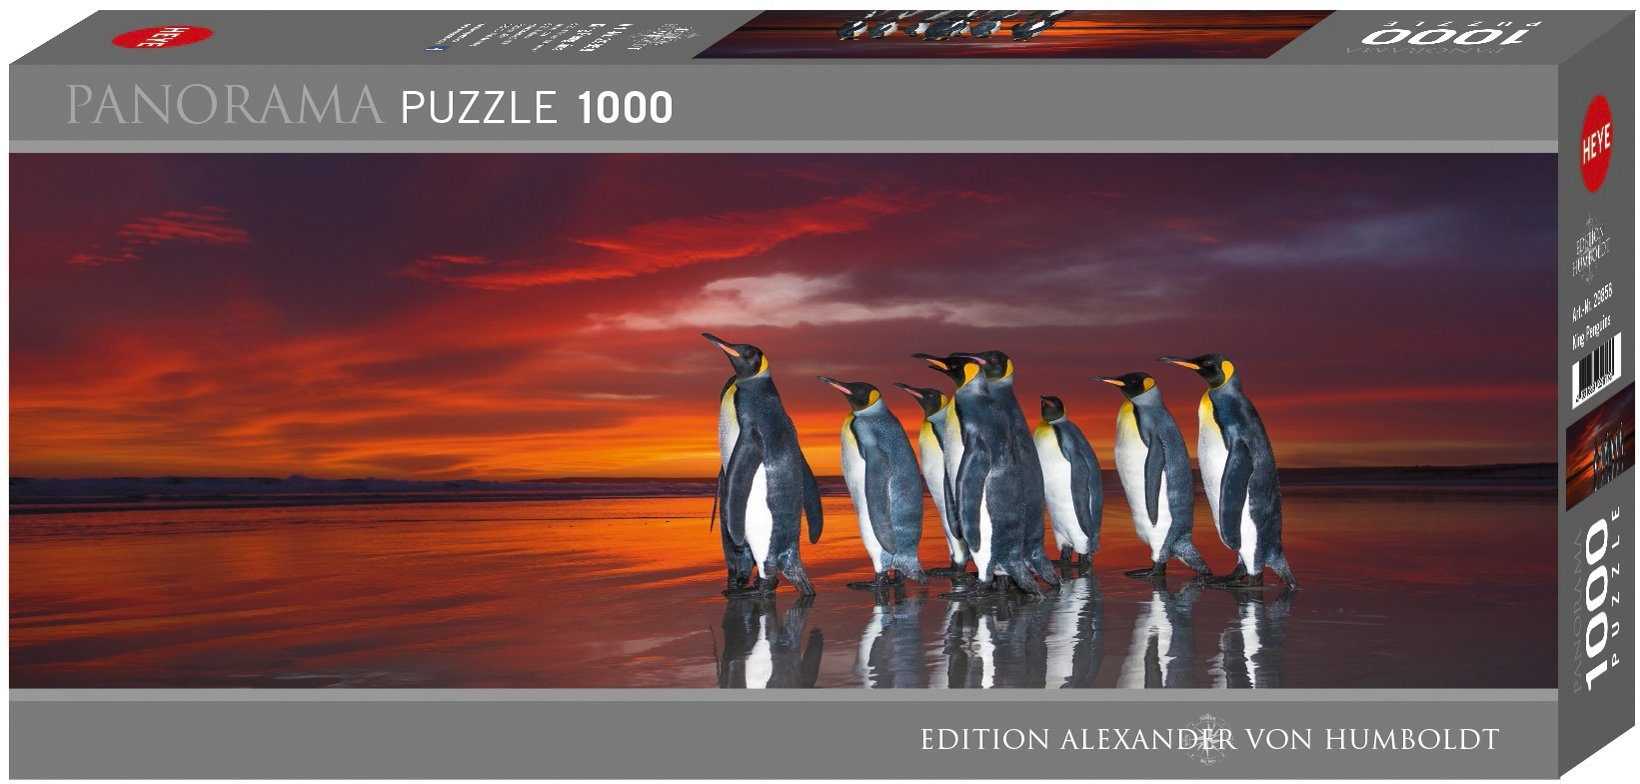 King Made in Penguins, HEYE 1000 Humboldt, Puzzleteile, Puzzle Edition Europe